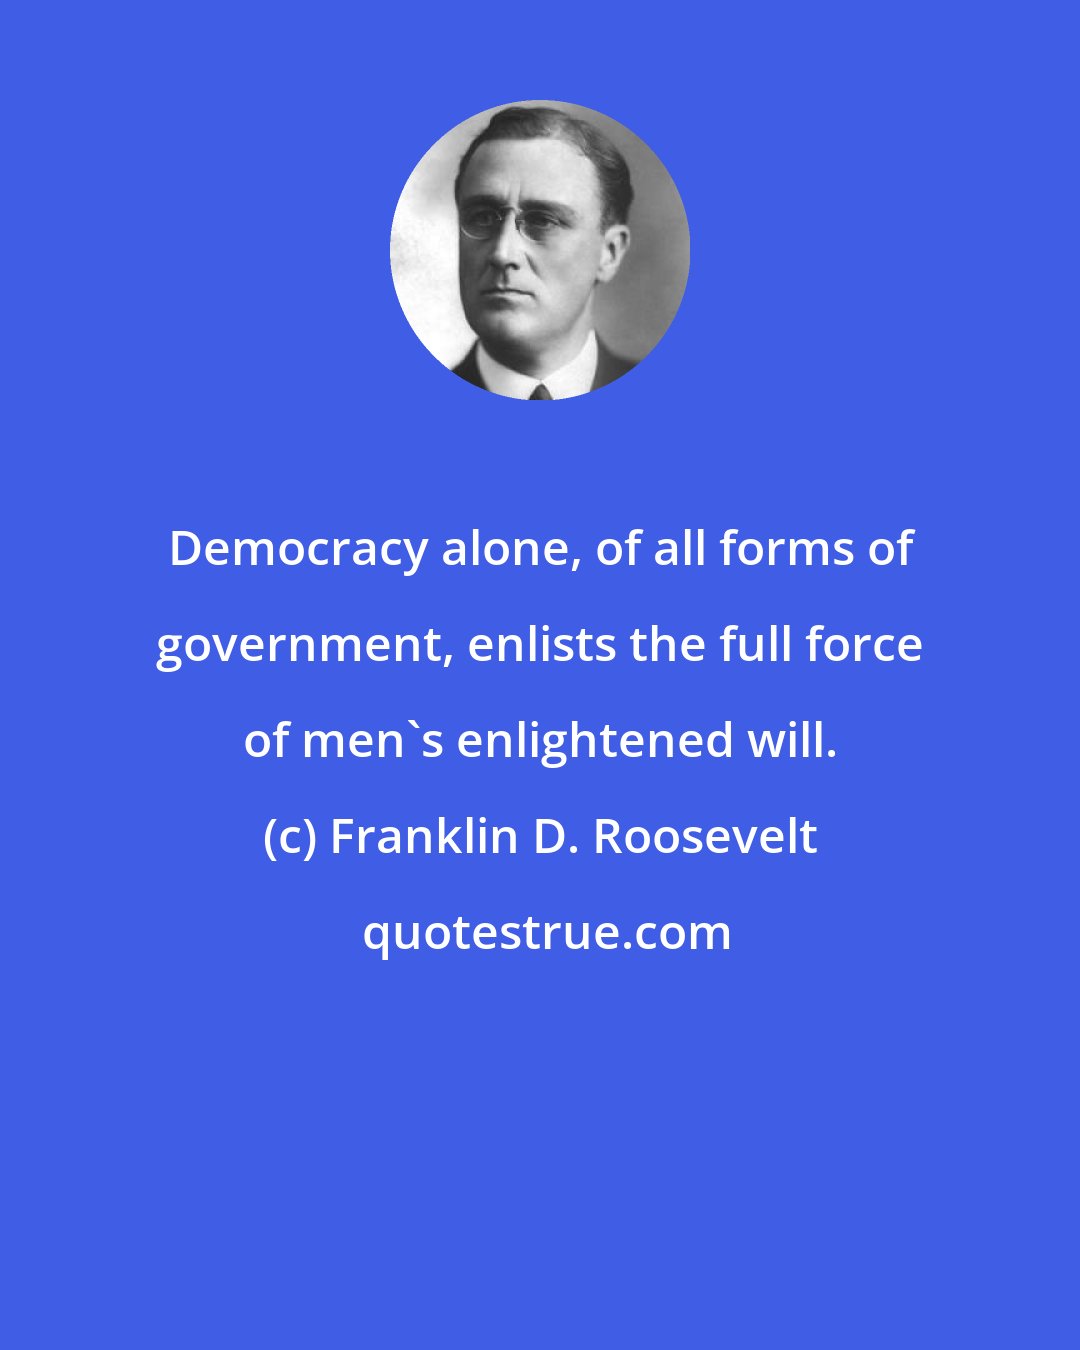 Franklin D. Roosevelt: Democracy alone, of all forms of government, enlists the full force of men's enlightened will.